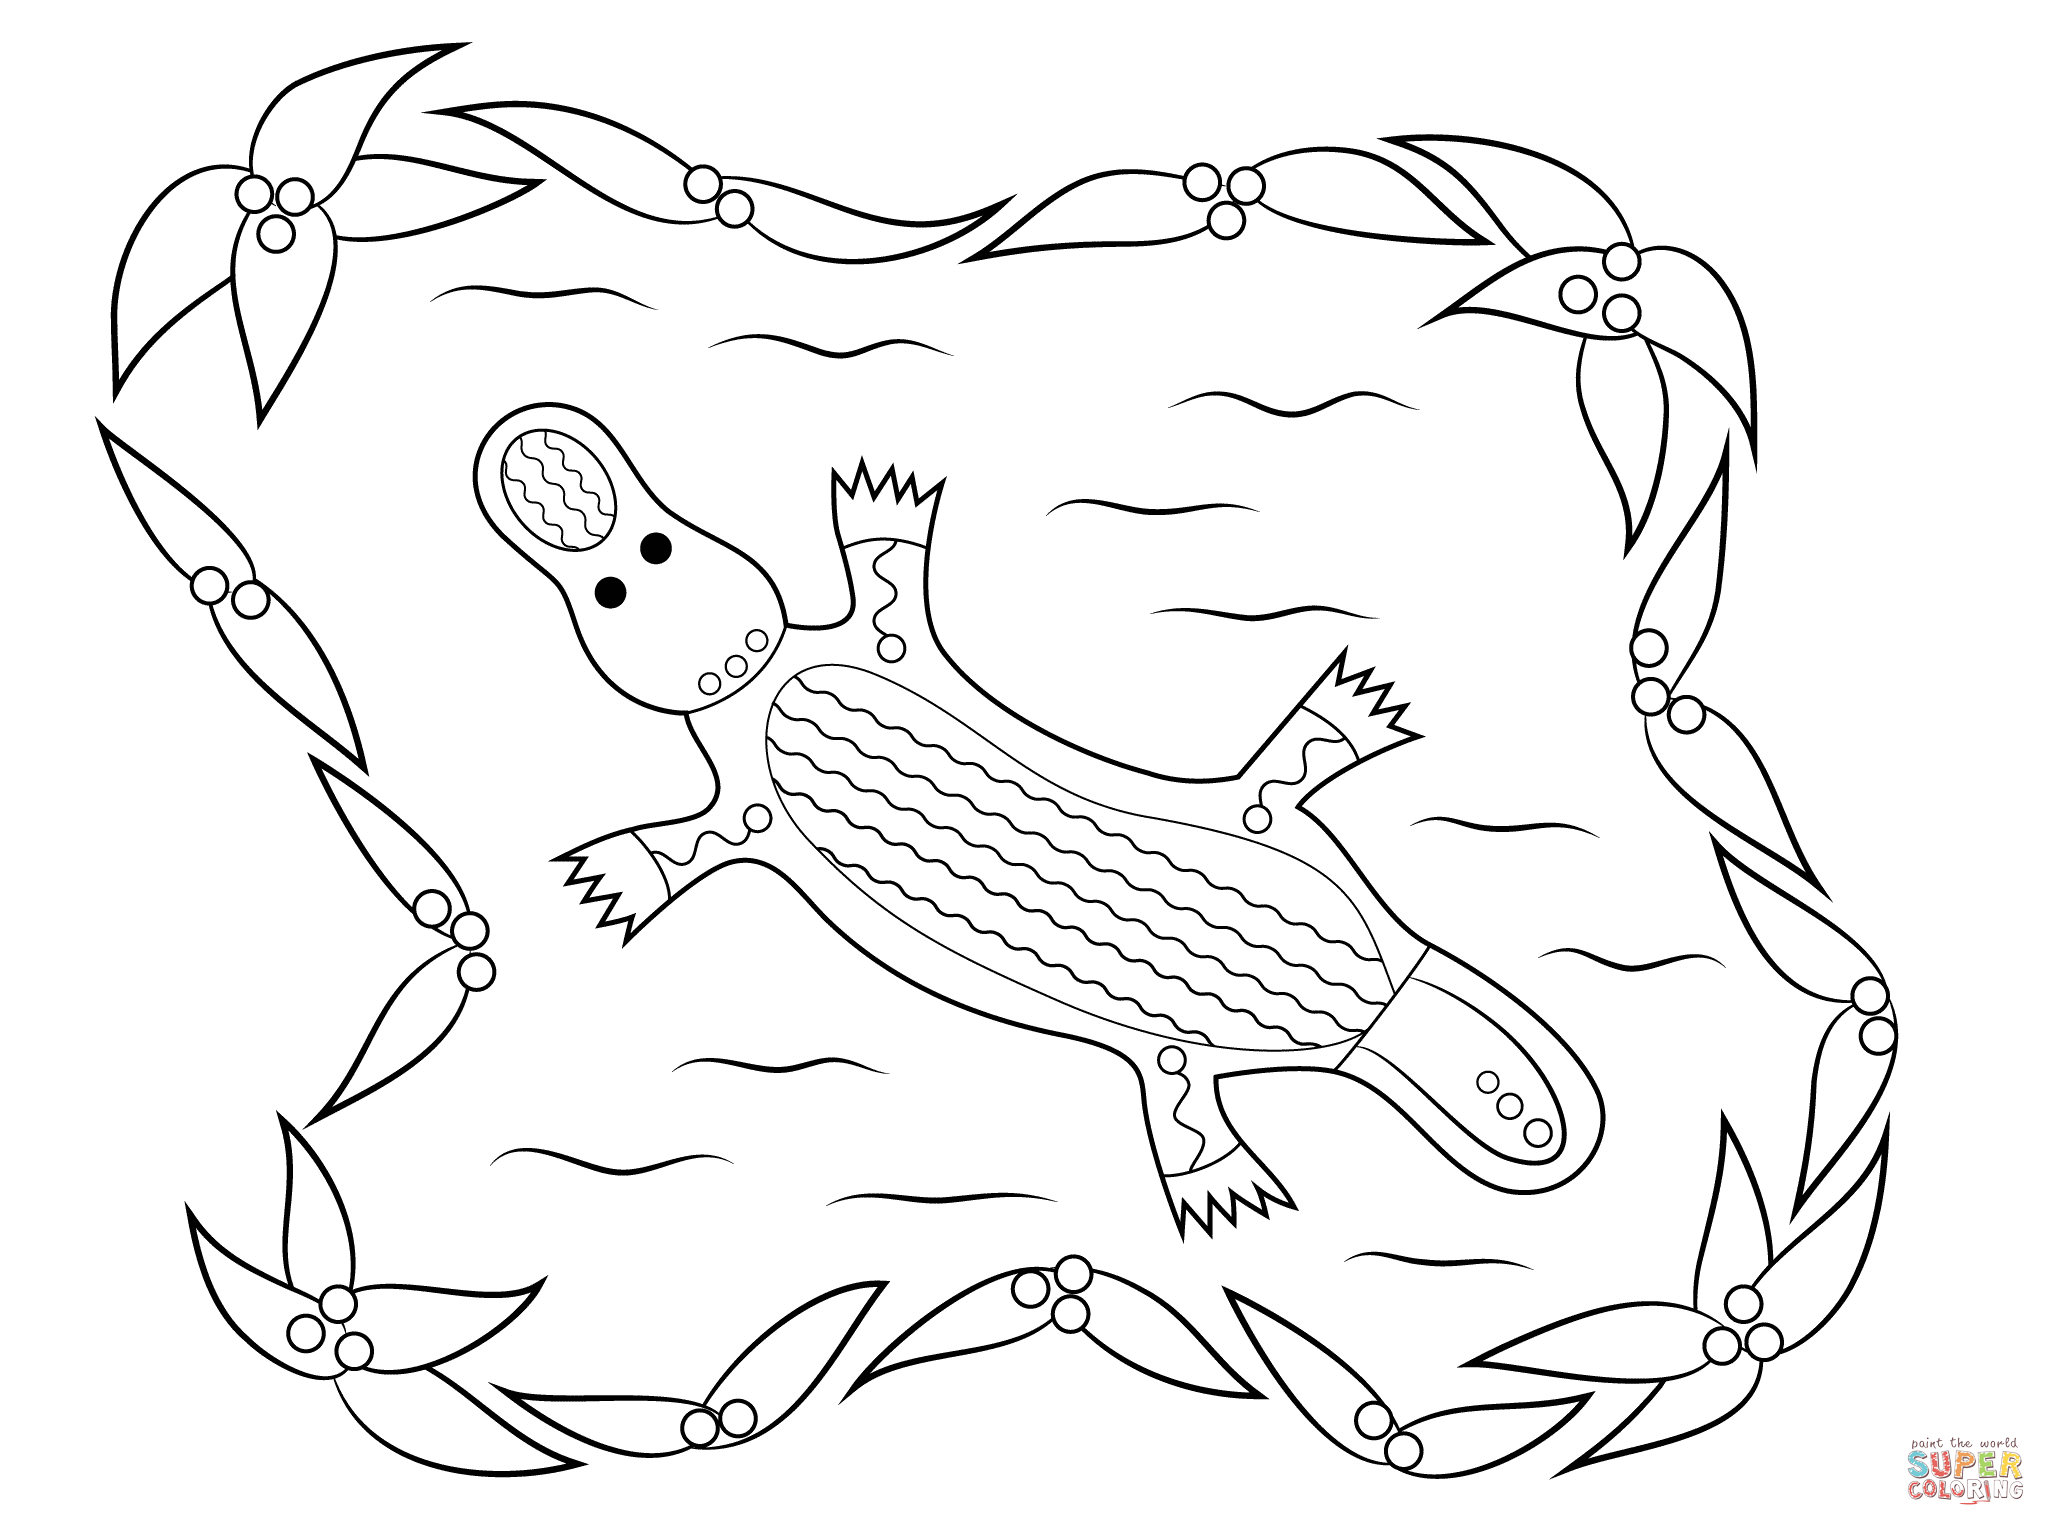 Platypus Aboriginal Art Coloring Page | Free Printable Coloring Pages - Free Printable Aboriginal Colouring Pages